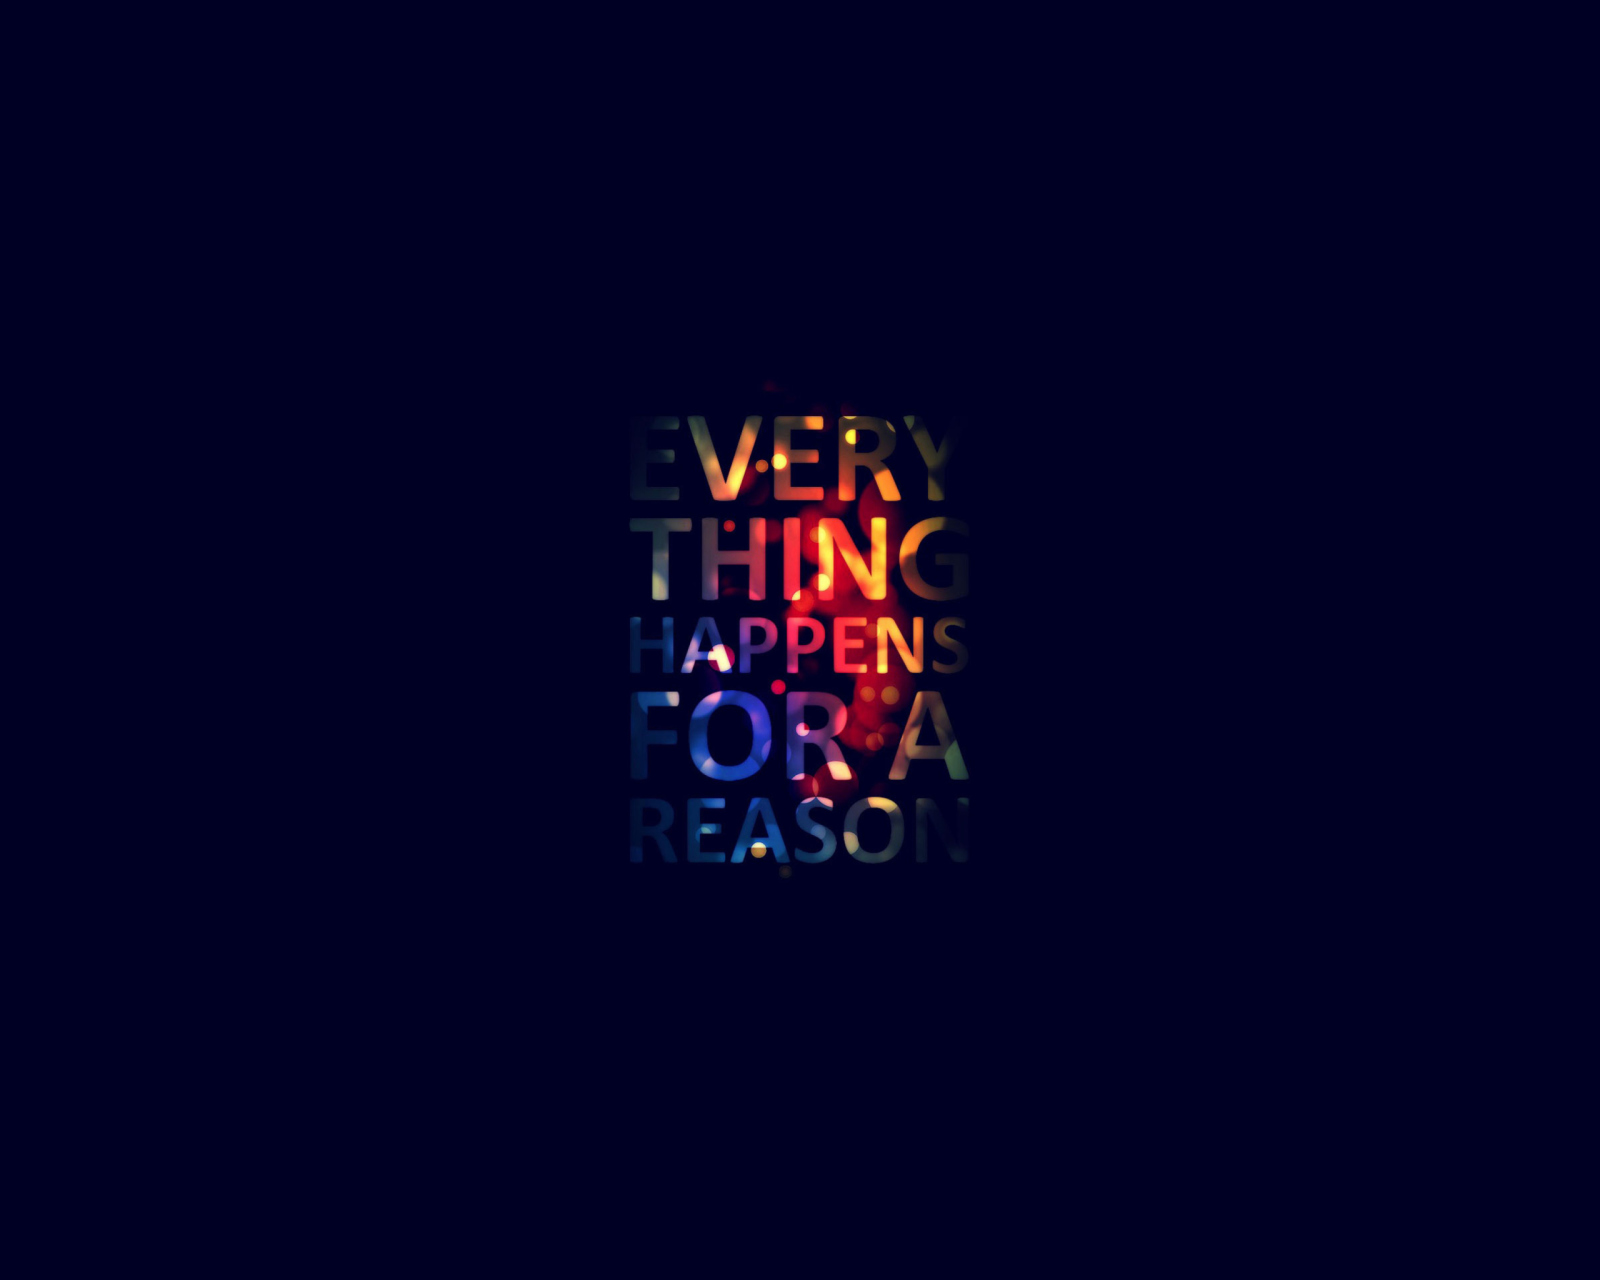 Das Everything Happens For Reason Wallpaper 1600x1280